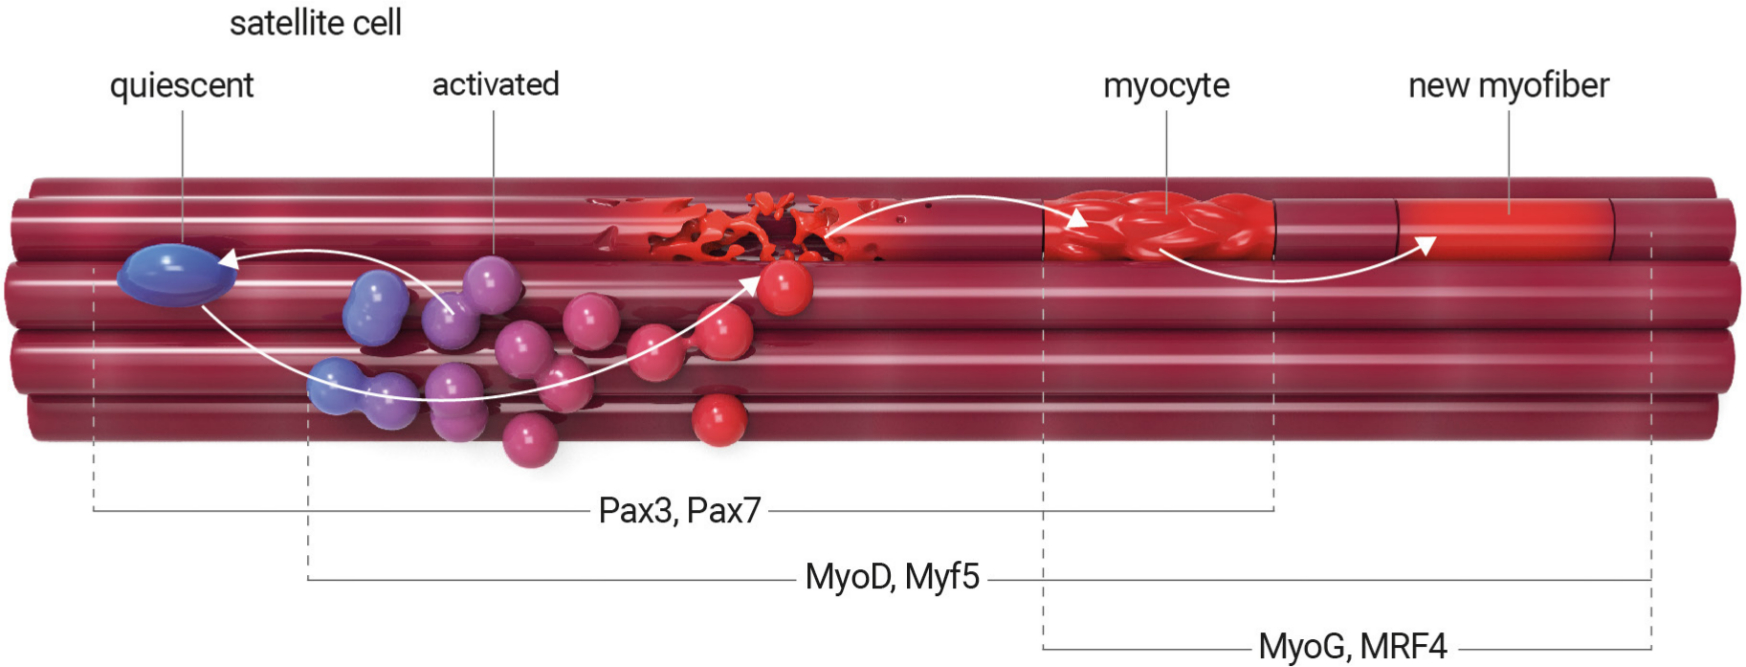 Fig. 2 
            Satellite stem cell differentiation process. In healthy adult muscle, satellite cells remain in a nonproliferative, quiescent state. They are activated in response to muscle injury or exercise. Activated satellite cells proliferate, undergo self-renewal, and differentiate into myoblasts and then to myocytes, which can mutually fuse and generate myotubes. During this time, the satellite stem cells encounter different fates. Quiescent satellite cells are characterized by the expression of transcription factors Pax7 and Pax3, whereas activated satellite cells coexpress Pax7 and myogenic differentiation factors Myf5 and MyoD. Activation of MyoG and Mrf4 characterizes the terminally differentiated myocyte. Diseases can impair satellite cell activation and proliferation, resulting in the inhibition of terminal differentiation.
          